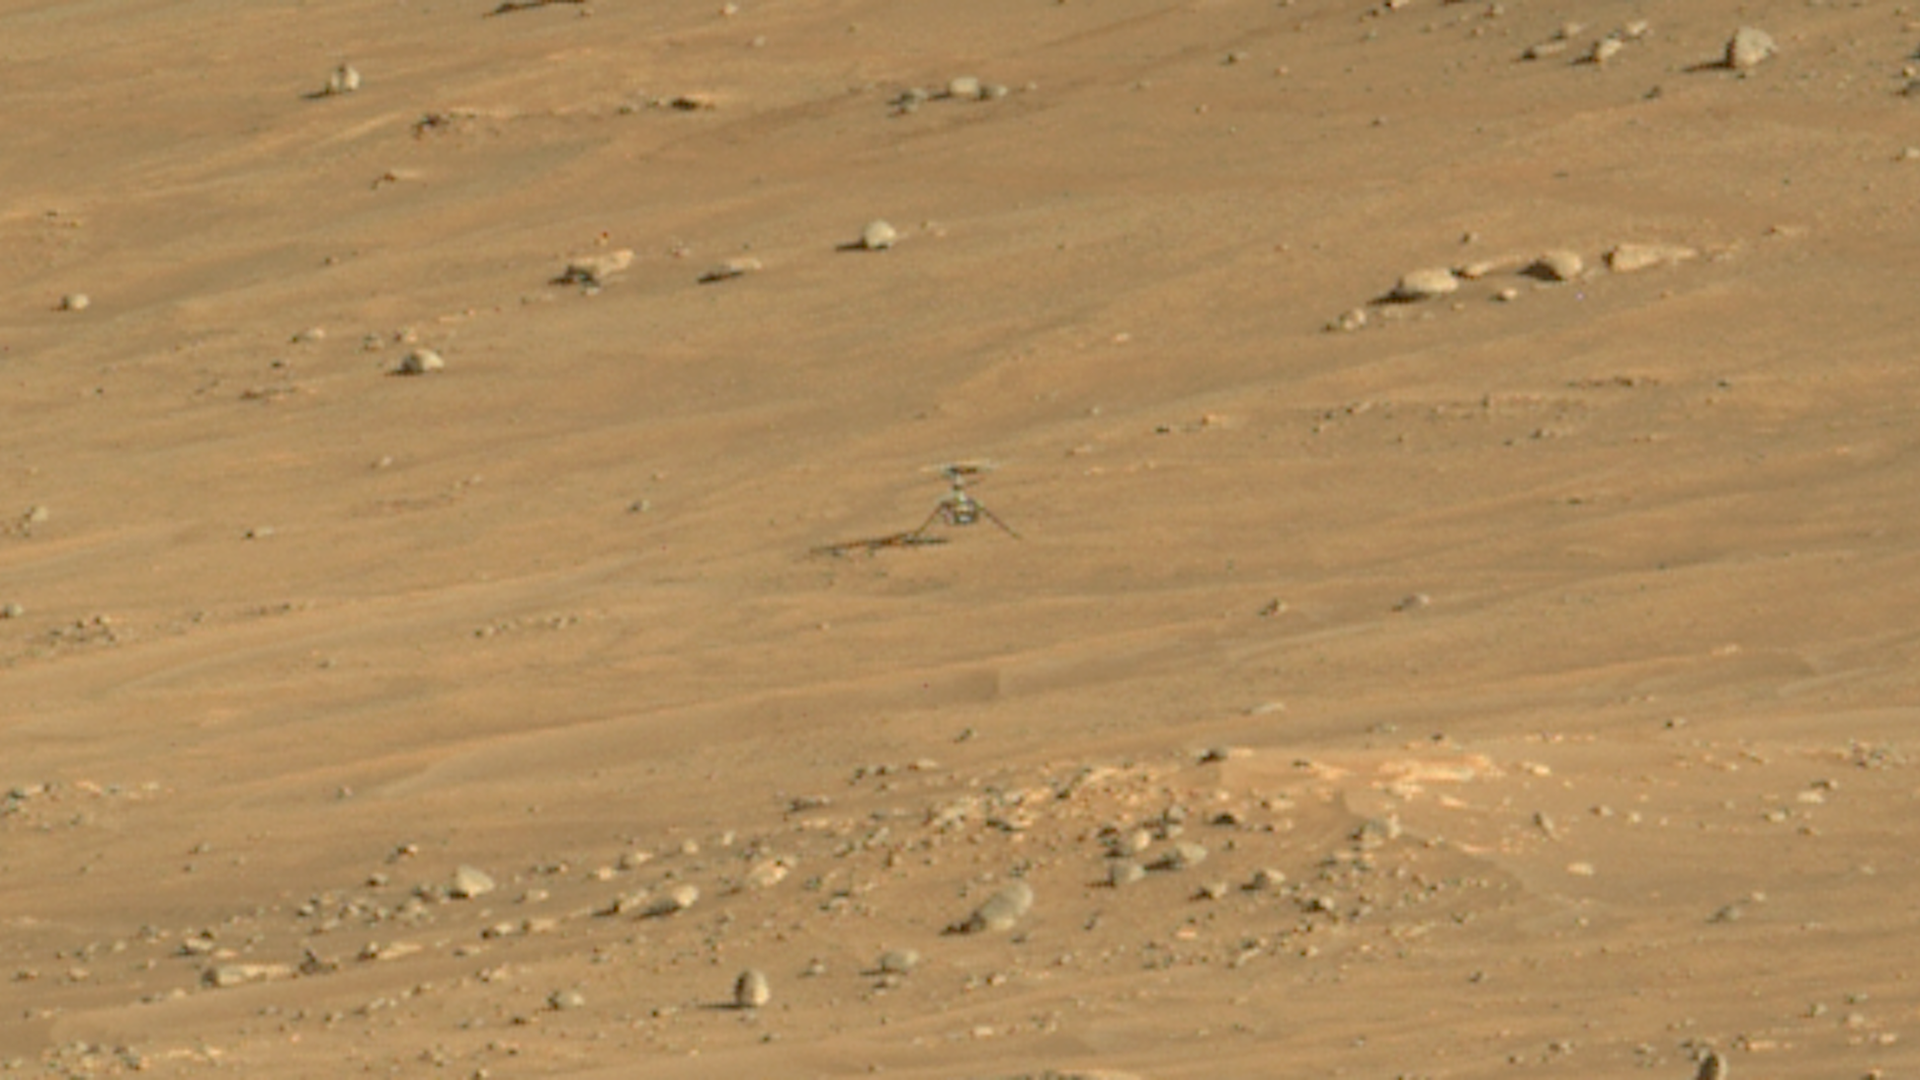 The small Ingenuity helicopter on Mars